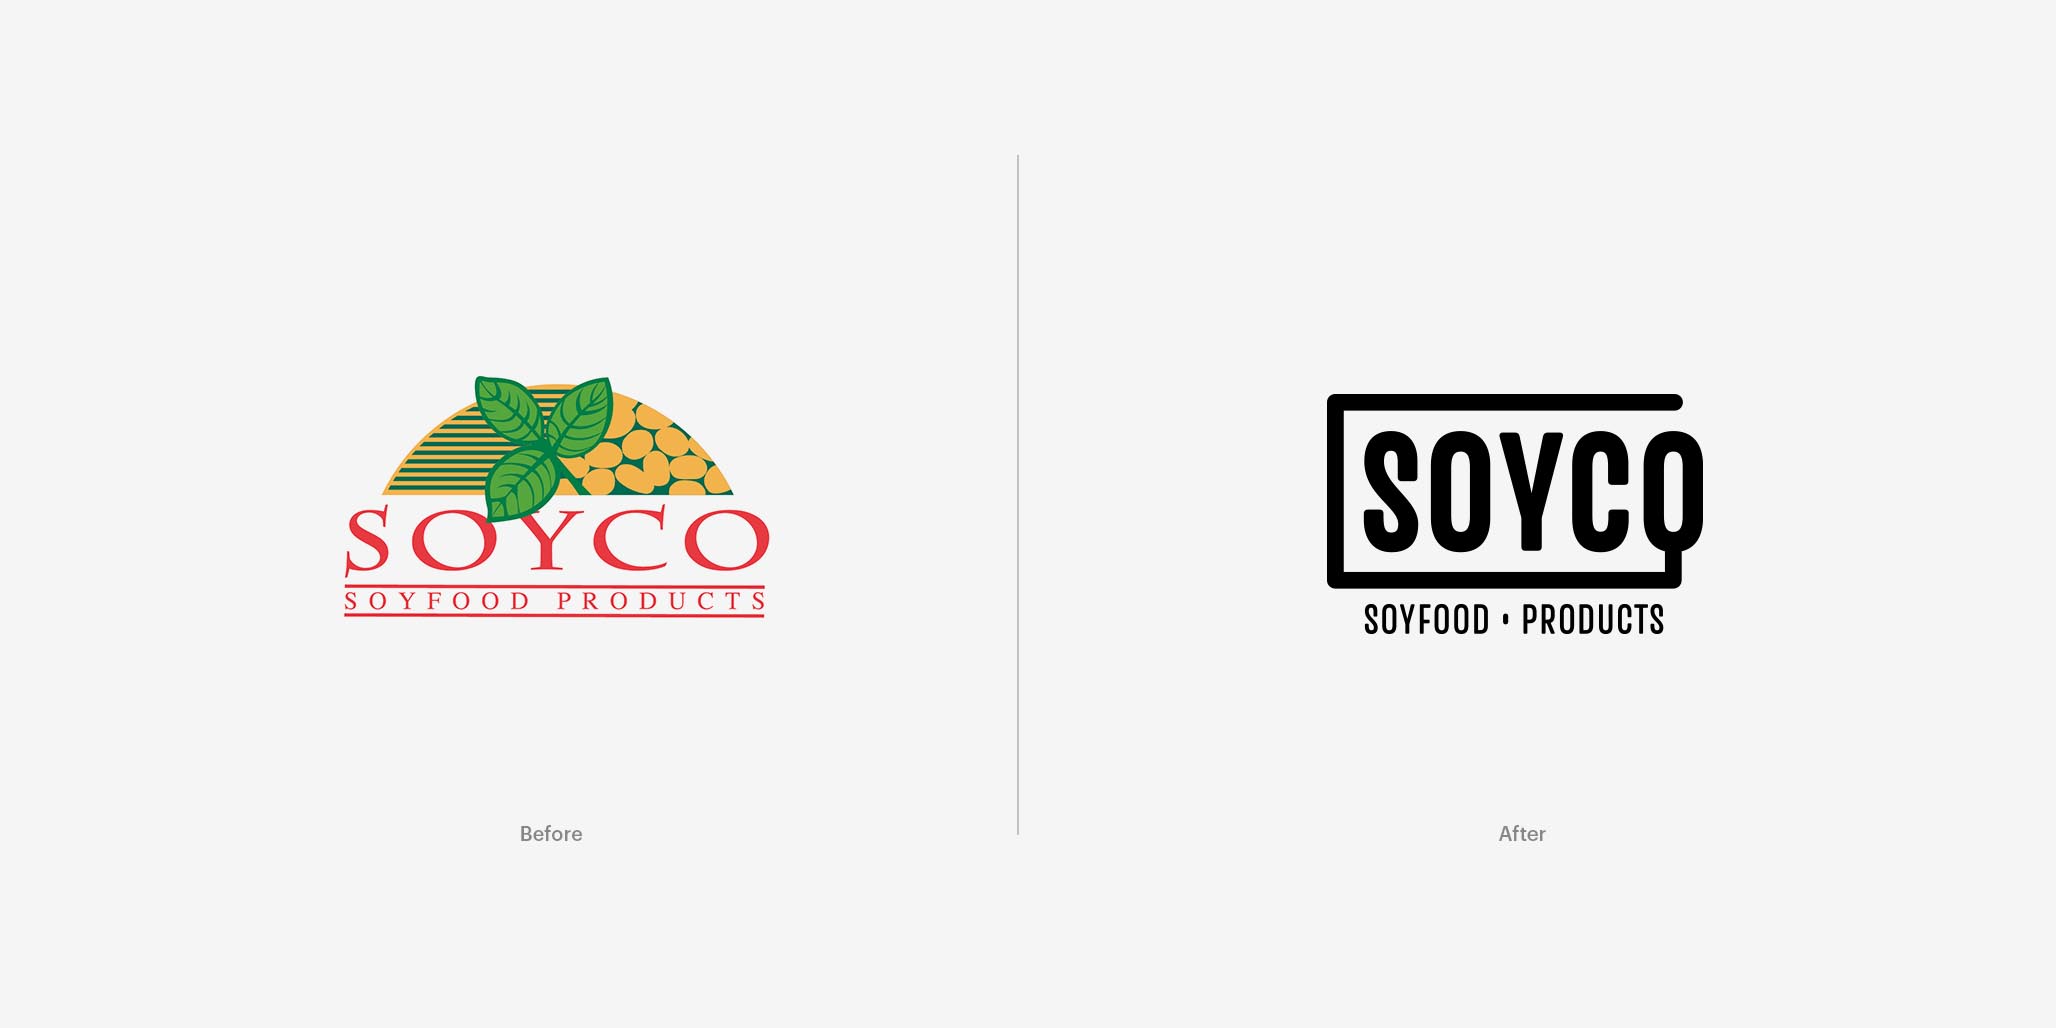 Brand Identity & Packaging Design project for FMCG food products by Branding Agency, Percept, image B